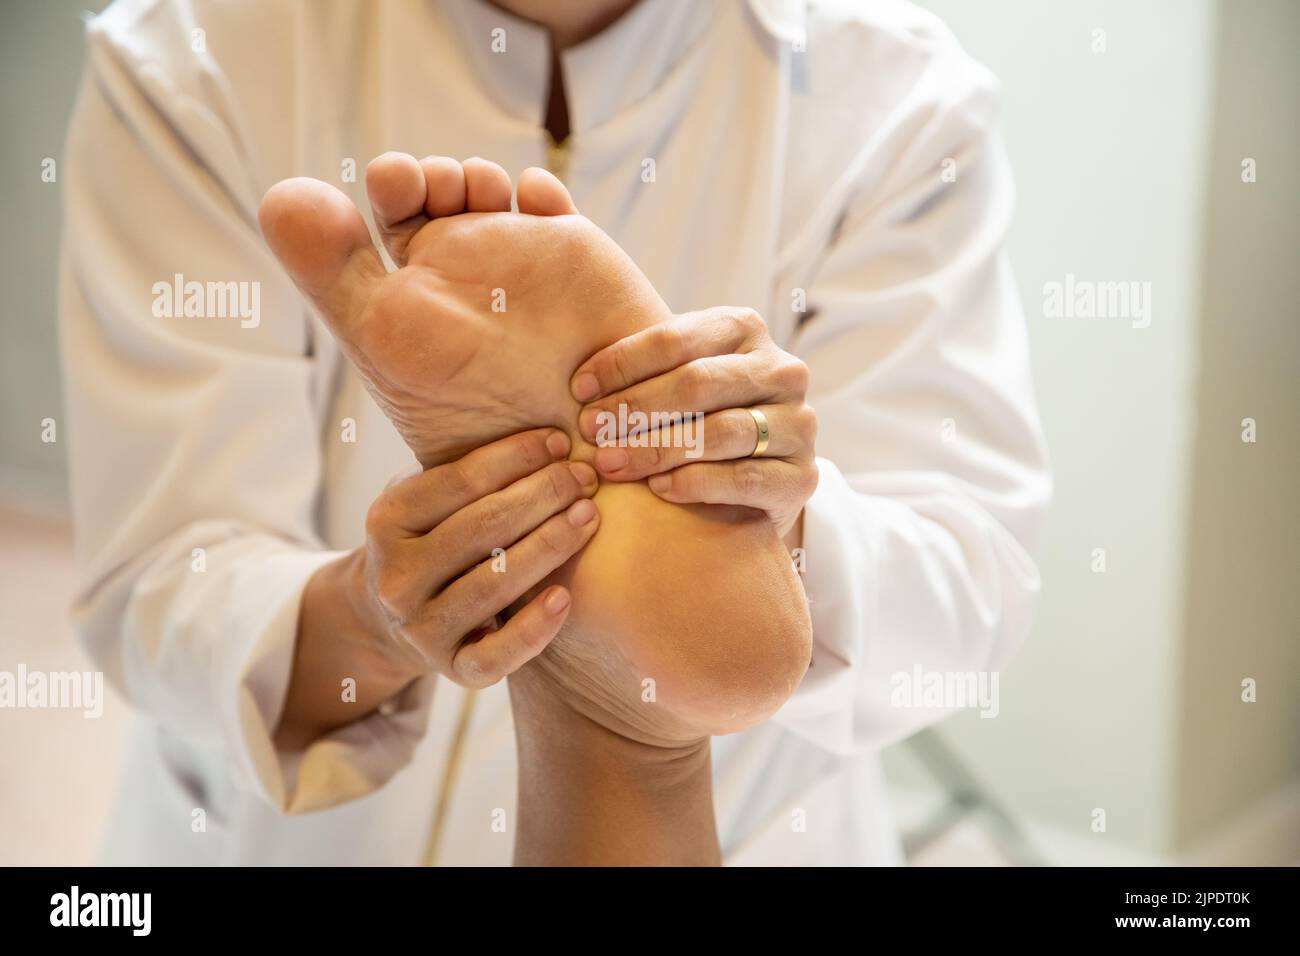 Goiânia, Goias, Brazil – July 18, 2022: Closeup of massage therapist hands applying therapeutic massage to a patient's foot. Stock Photo